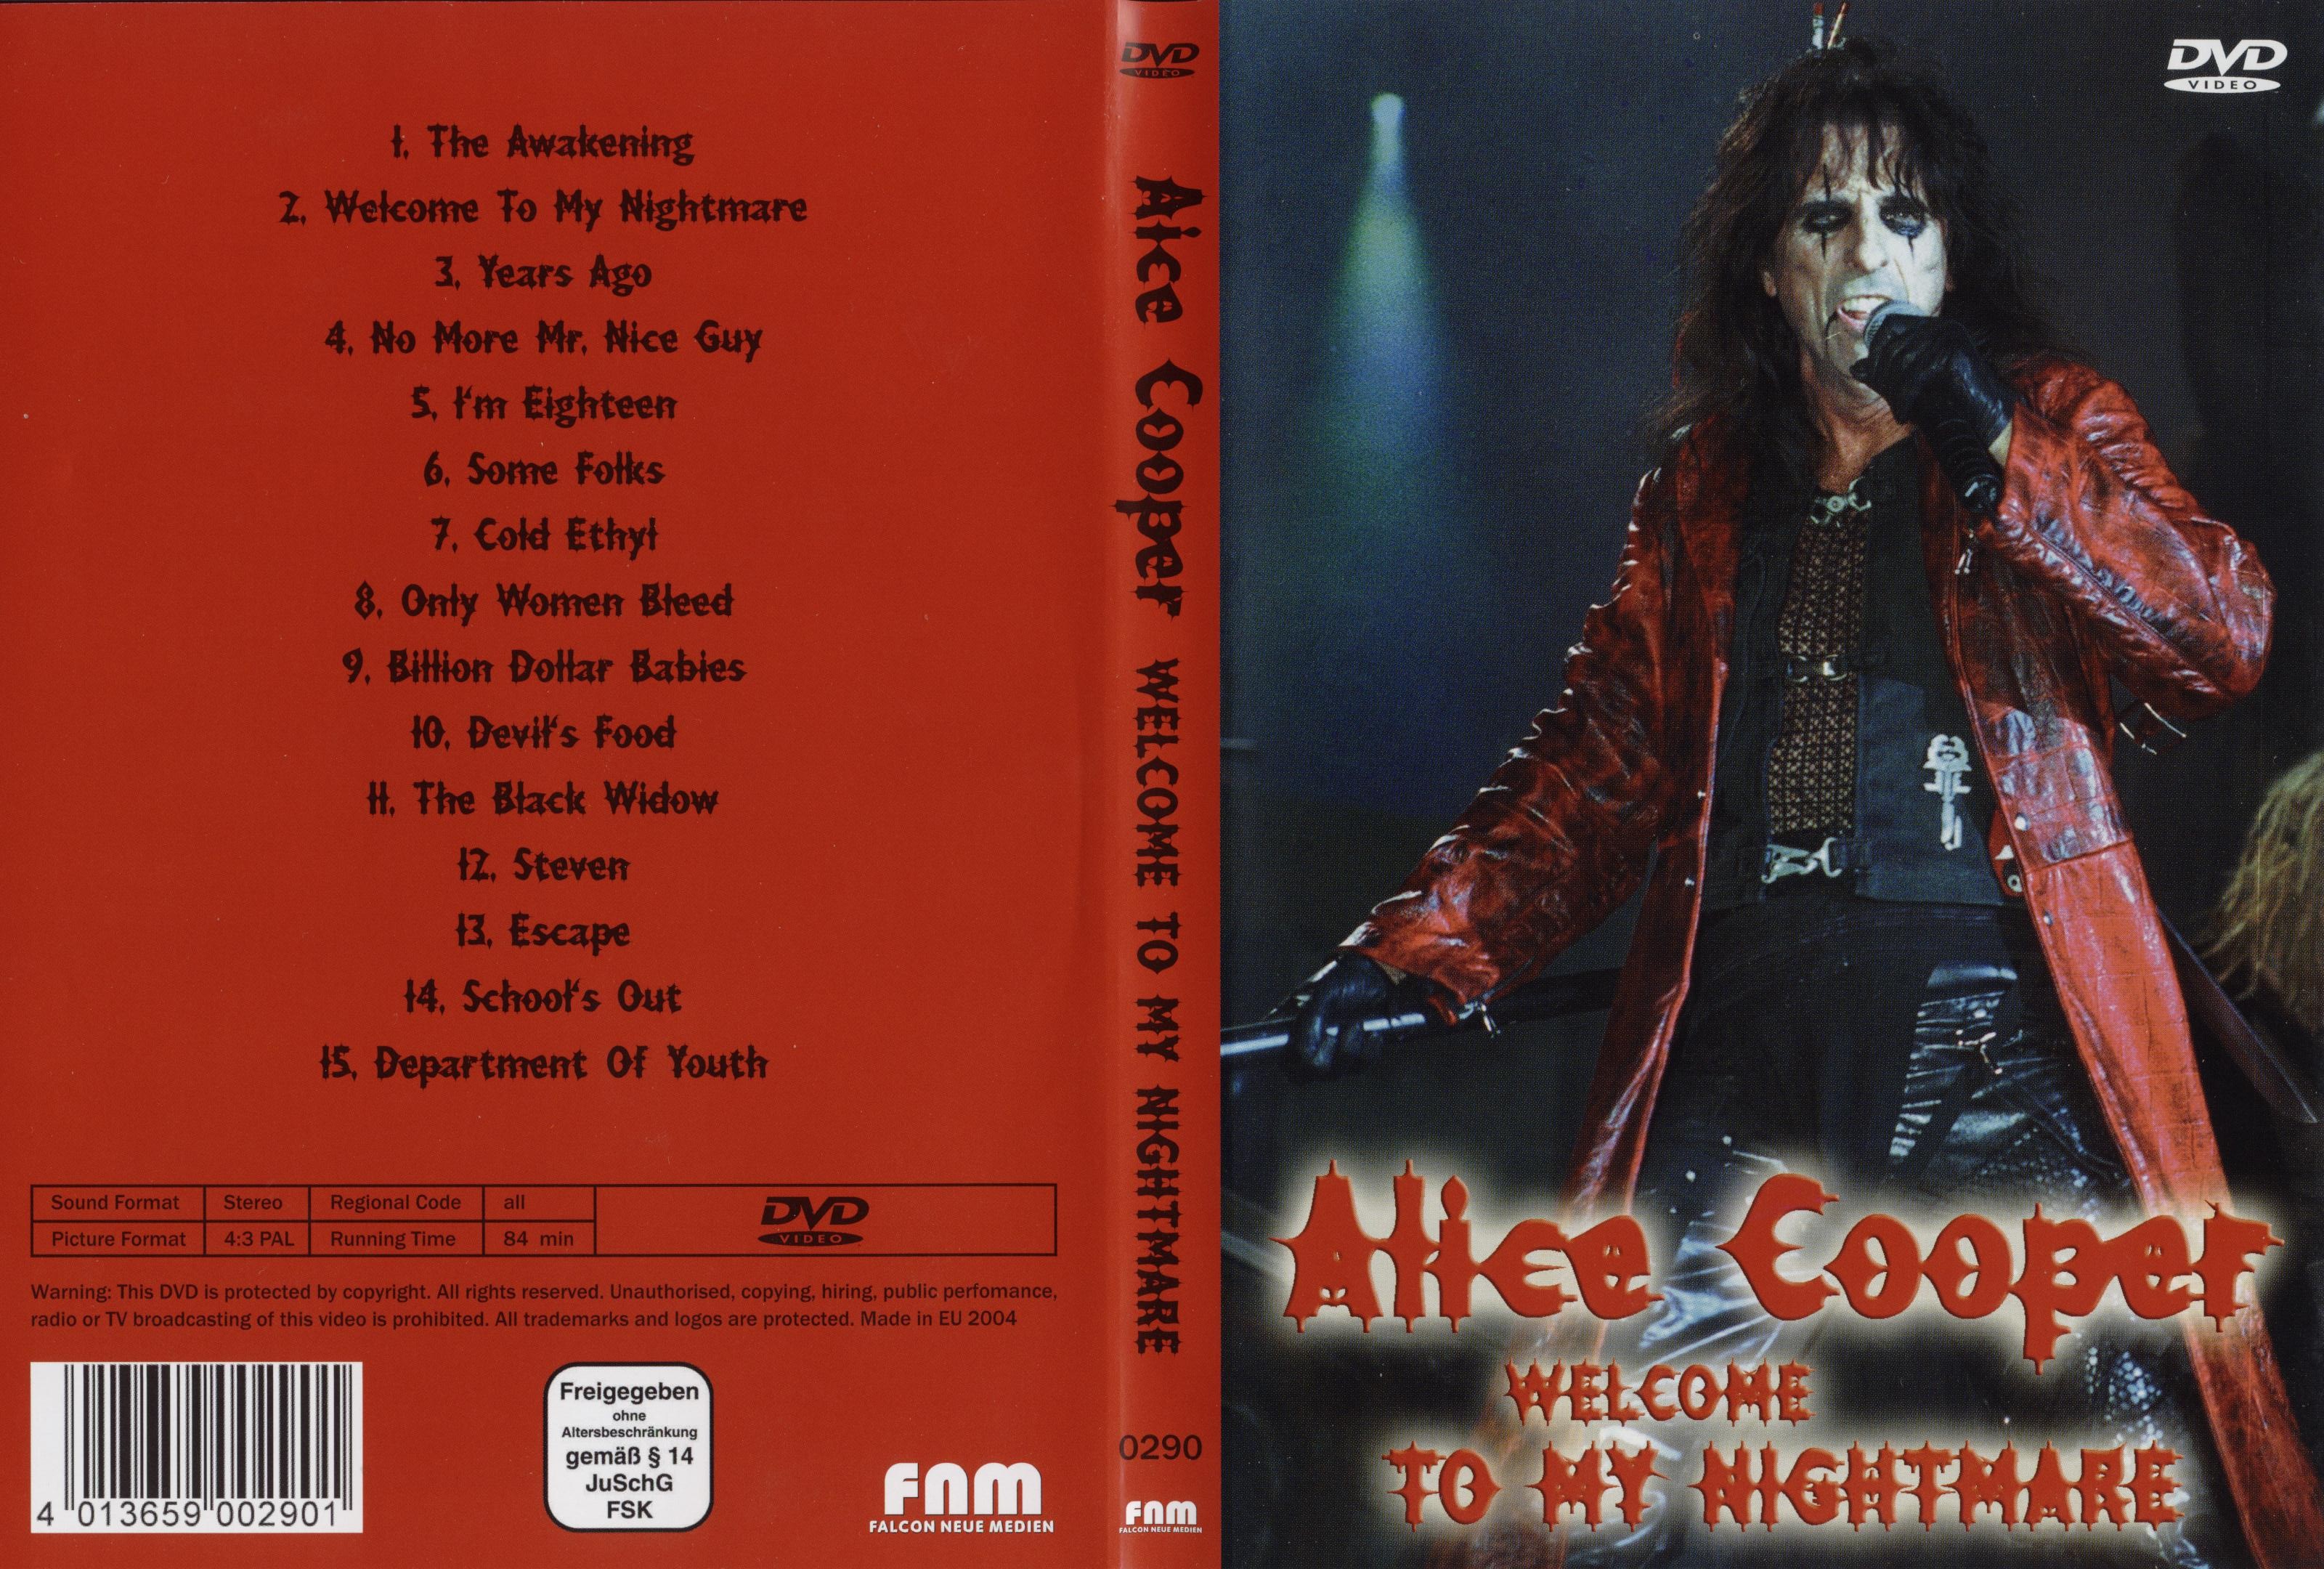 Jaquette DVD Alice Cooper welcome to my nigthmare